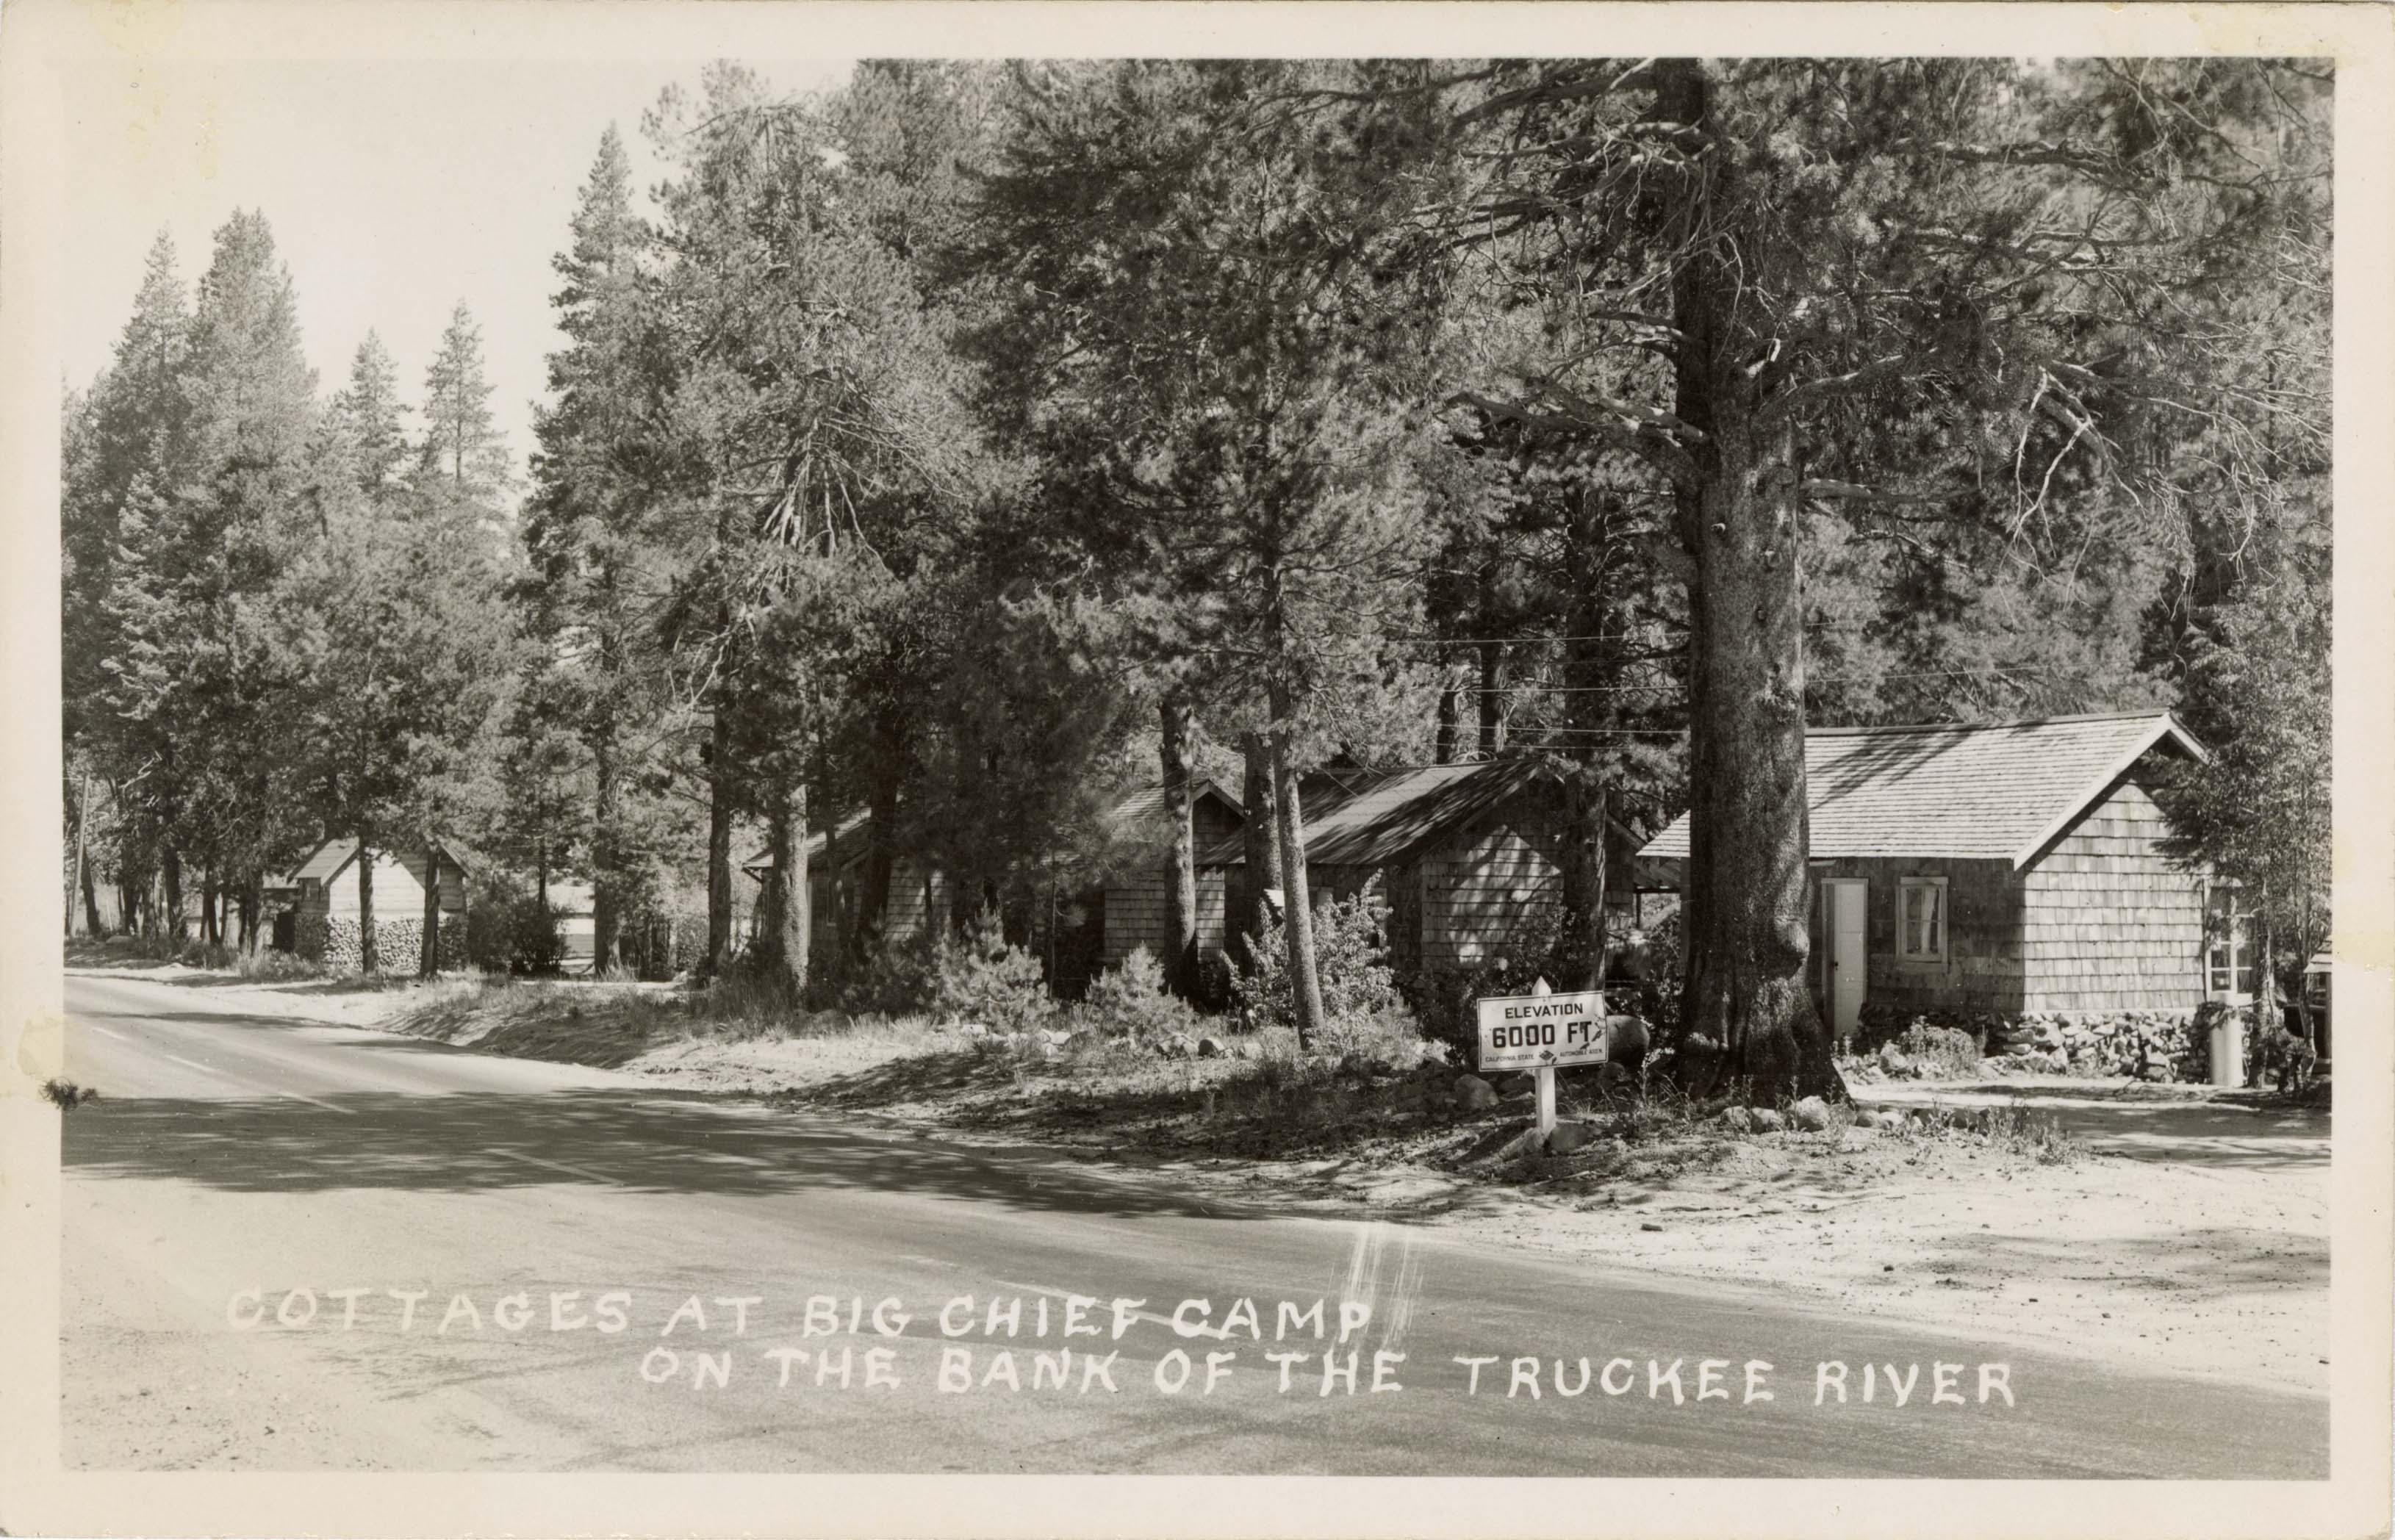 Cottages at Big Chief Camp on the banks of the Truckee River